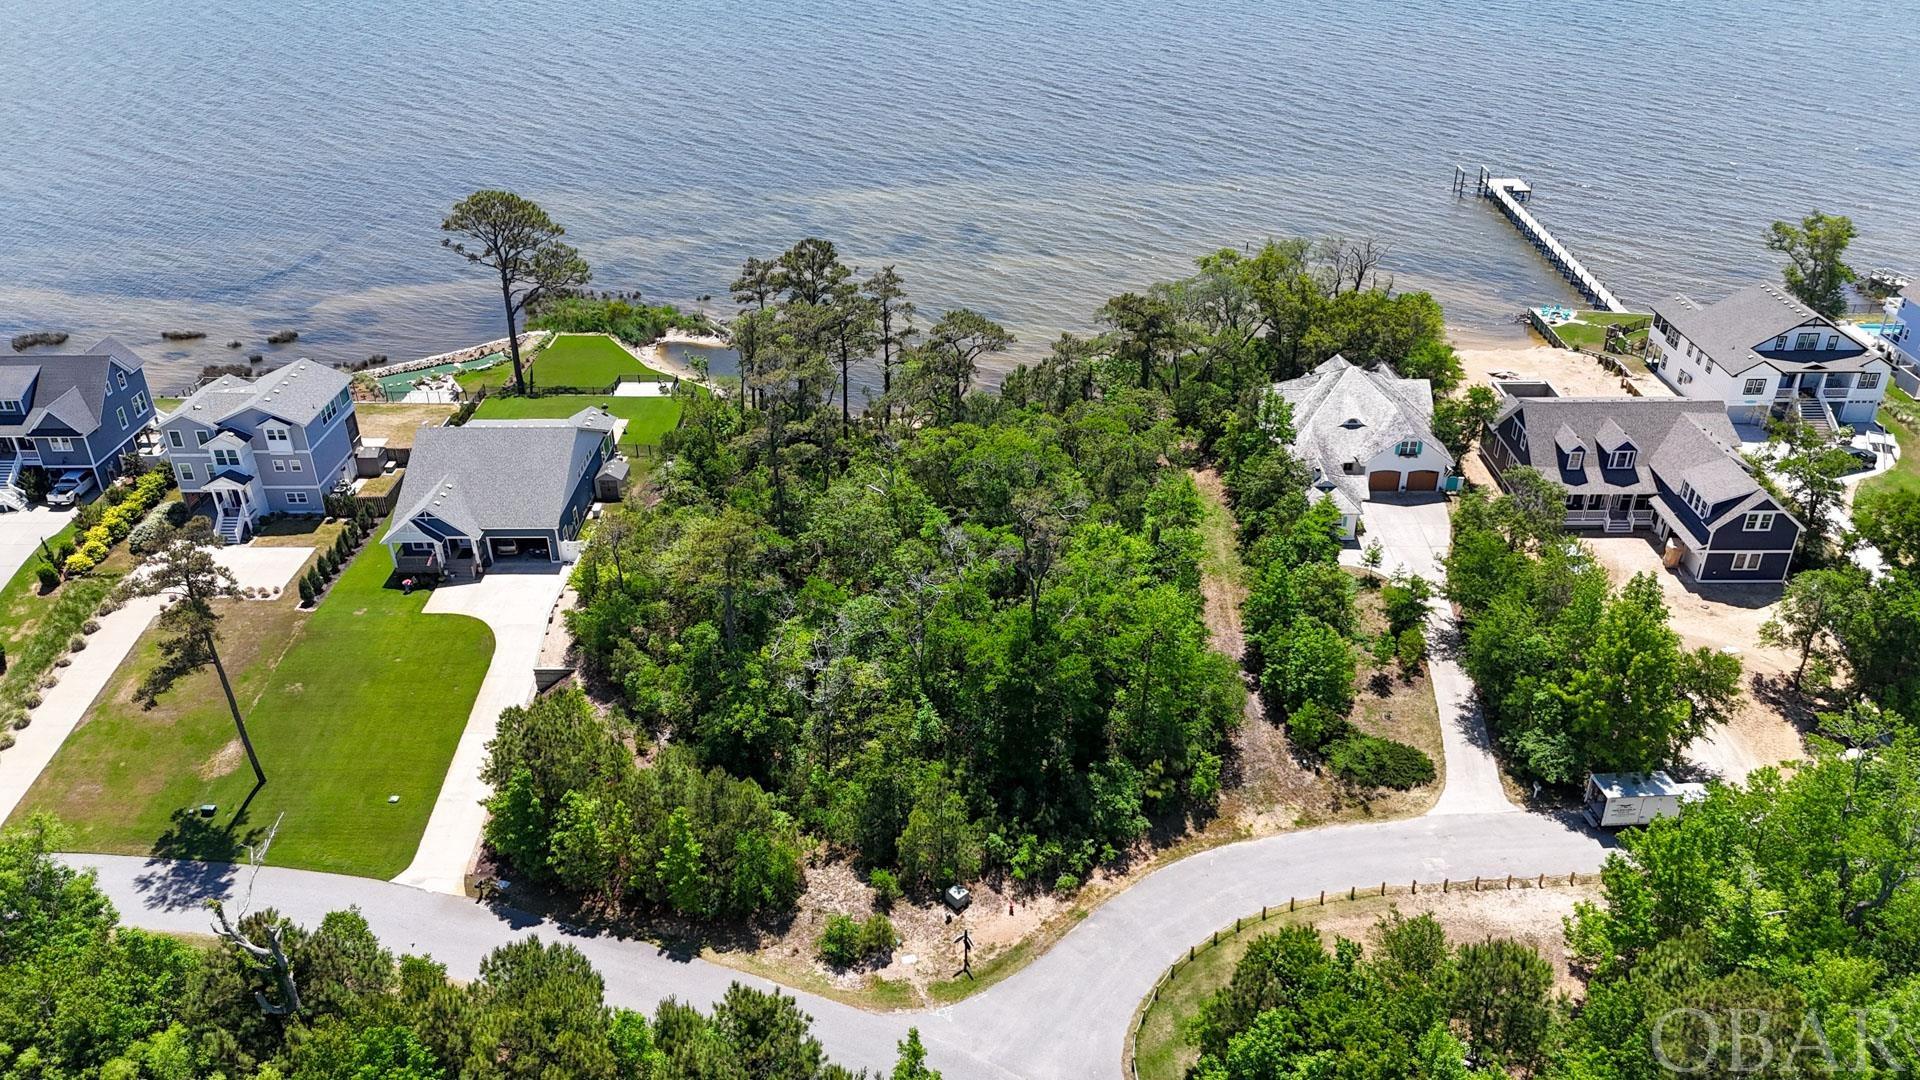 Beautiful sound front lot in the Carlyle Community! This large 17,500-square-foot lot would make the perfect location for your dream home. The lot is adjacent to the community sound access with amazing views over the Albemarle Sound. The majority of this lot falls in the X-Flood Zone setting you free from the need for flood insurance. Carlyle on the Sound emphasizes the need to preserve to natural foliage of the Outer Banks with 45% of the neighborhood being preserved as open space! Ask your agent about ready-to-build plans for this beautiful lot.